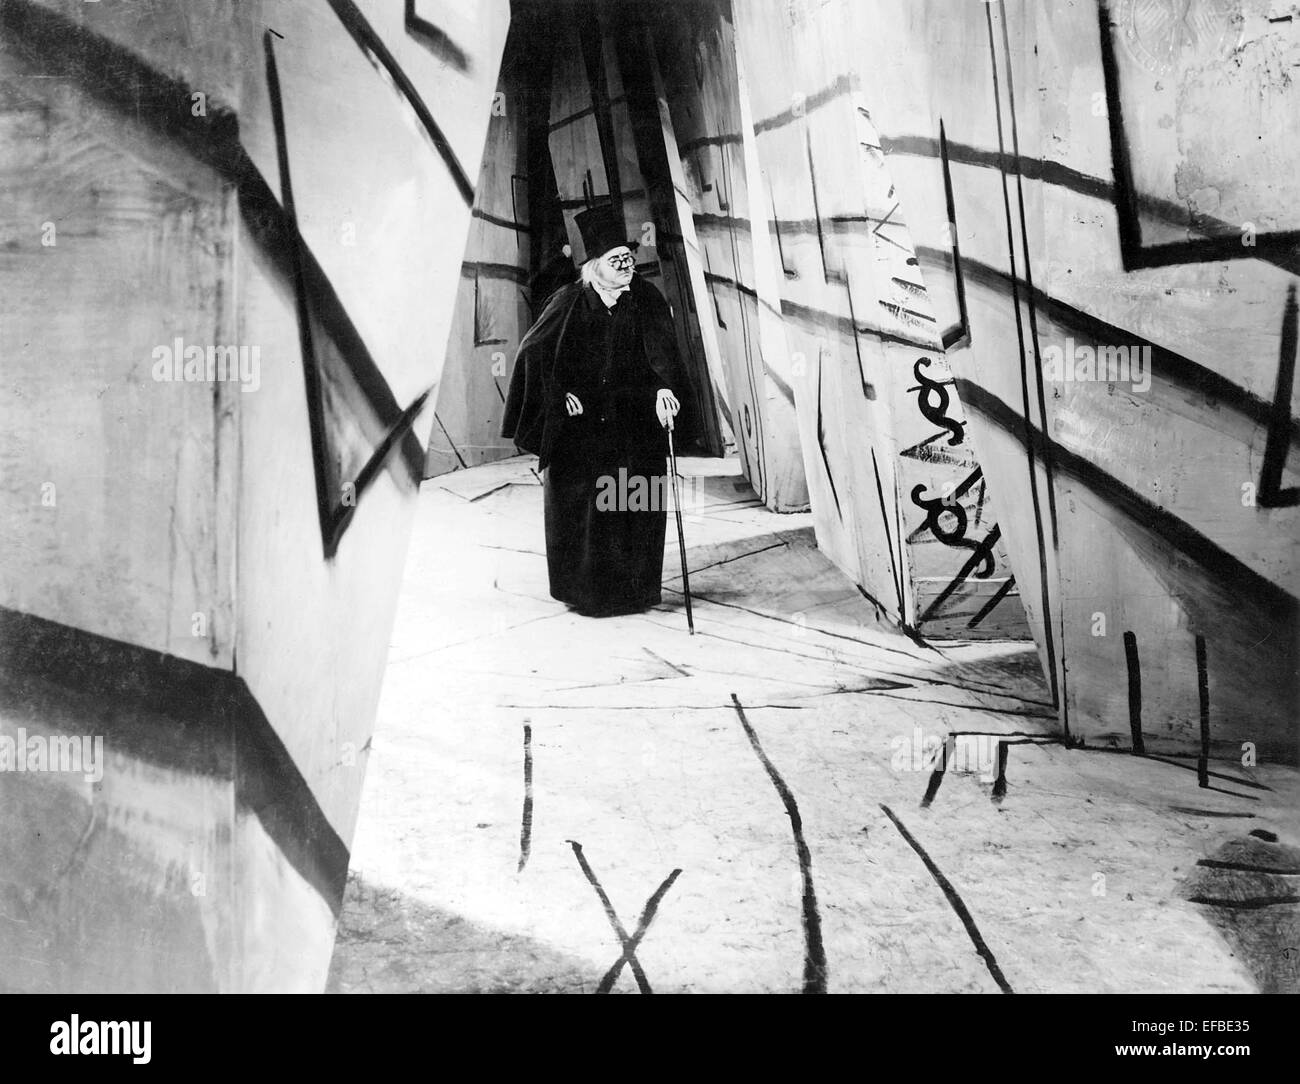 WERNER KRAUSS THE CABINET OF DR. CALIGARI (1920) Stock Photo